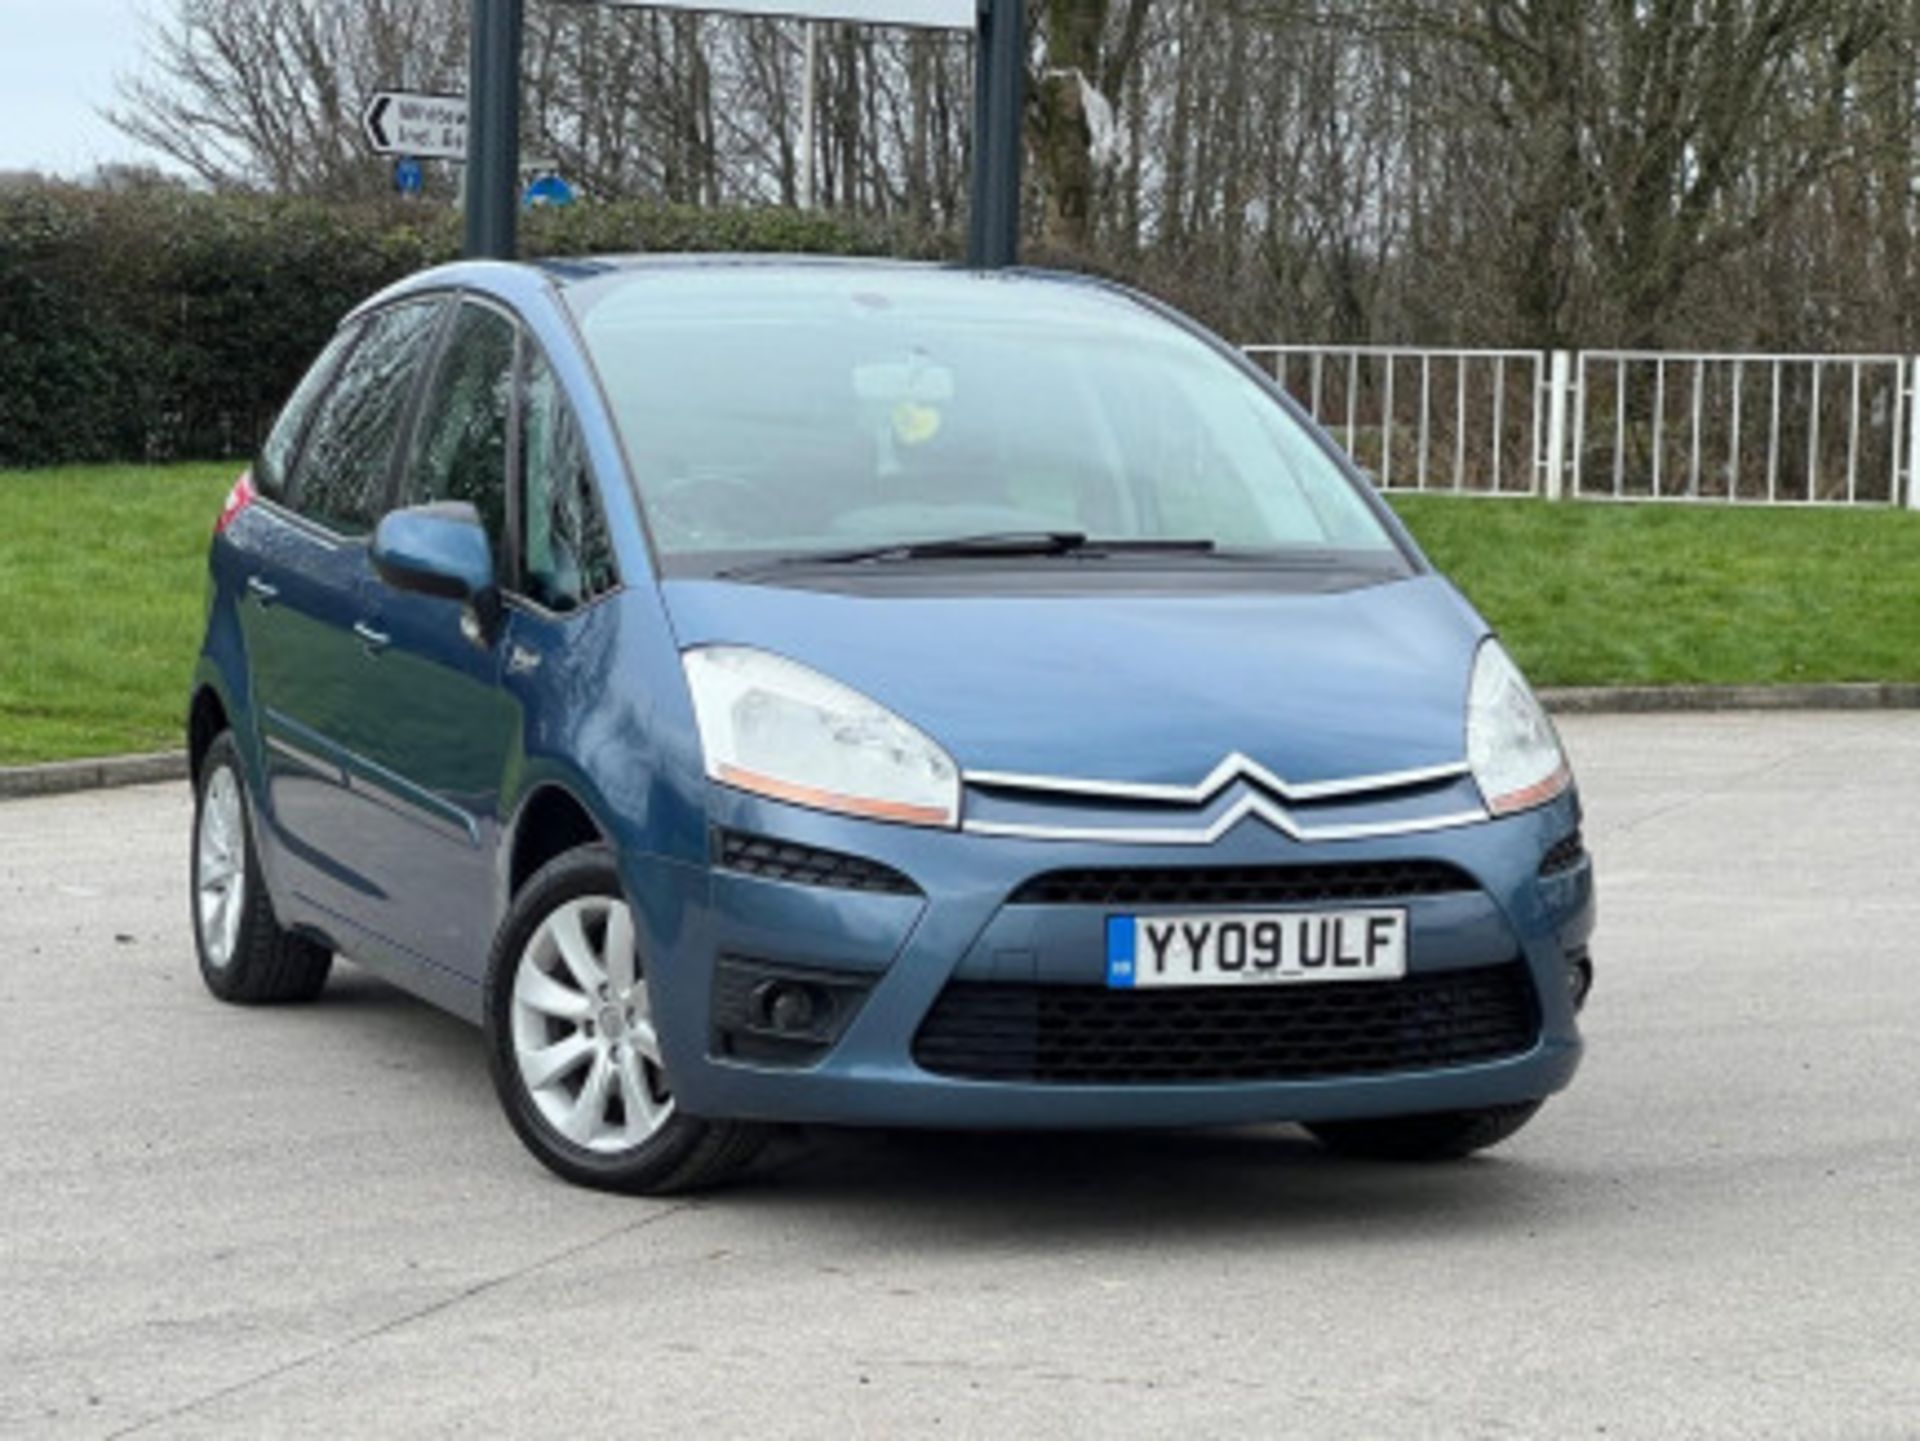 2009 CITROEN C4 PICASSO 1.6 HDI VTR+ EGS6 5DR >>--NO VAT ON HAMMER--<< - Image 49 of 123